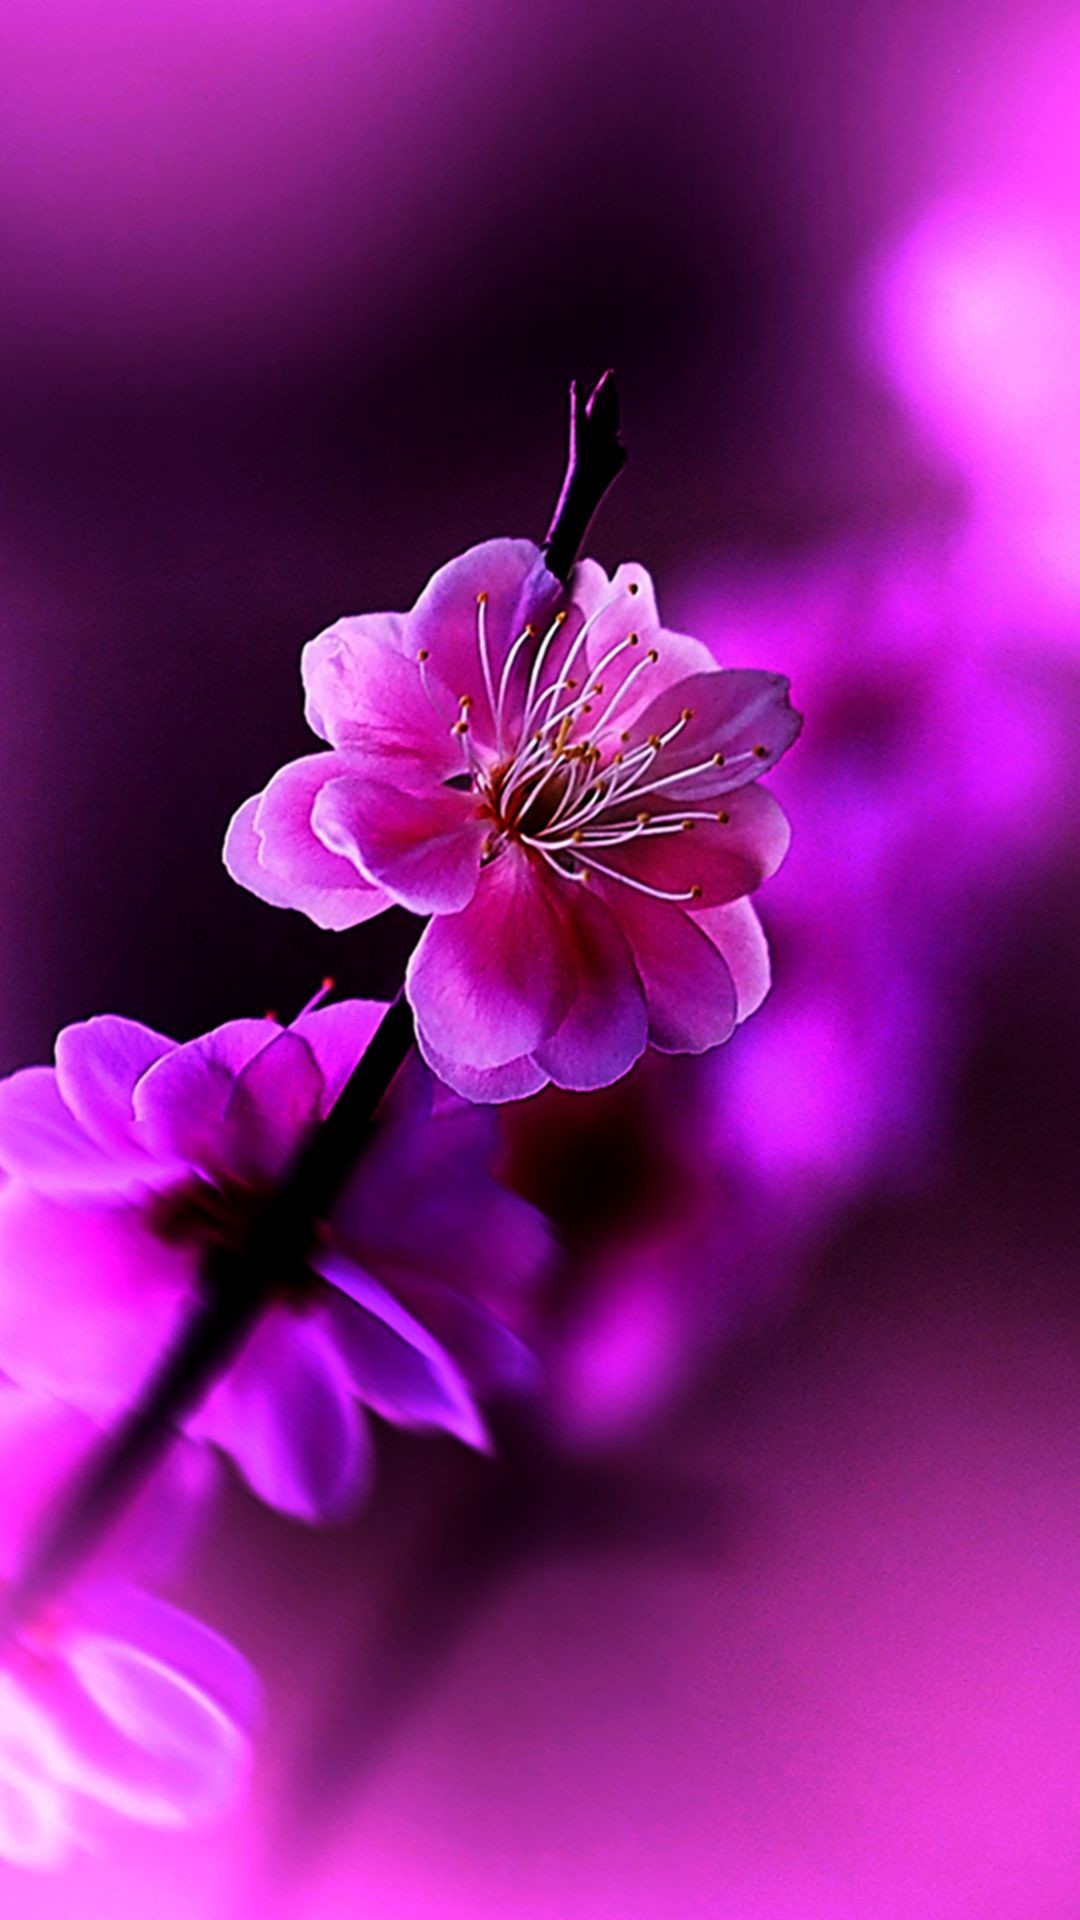 1080x1920 http://www.vactualpapers.com/gallery/spring-flowers-